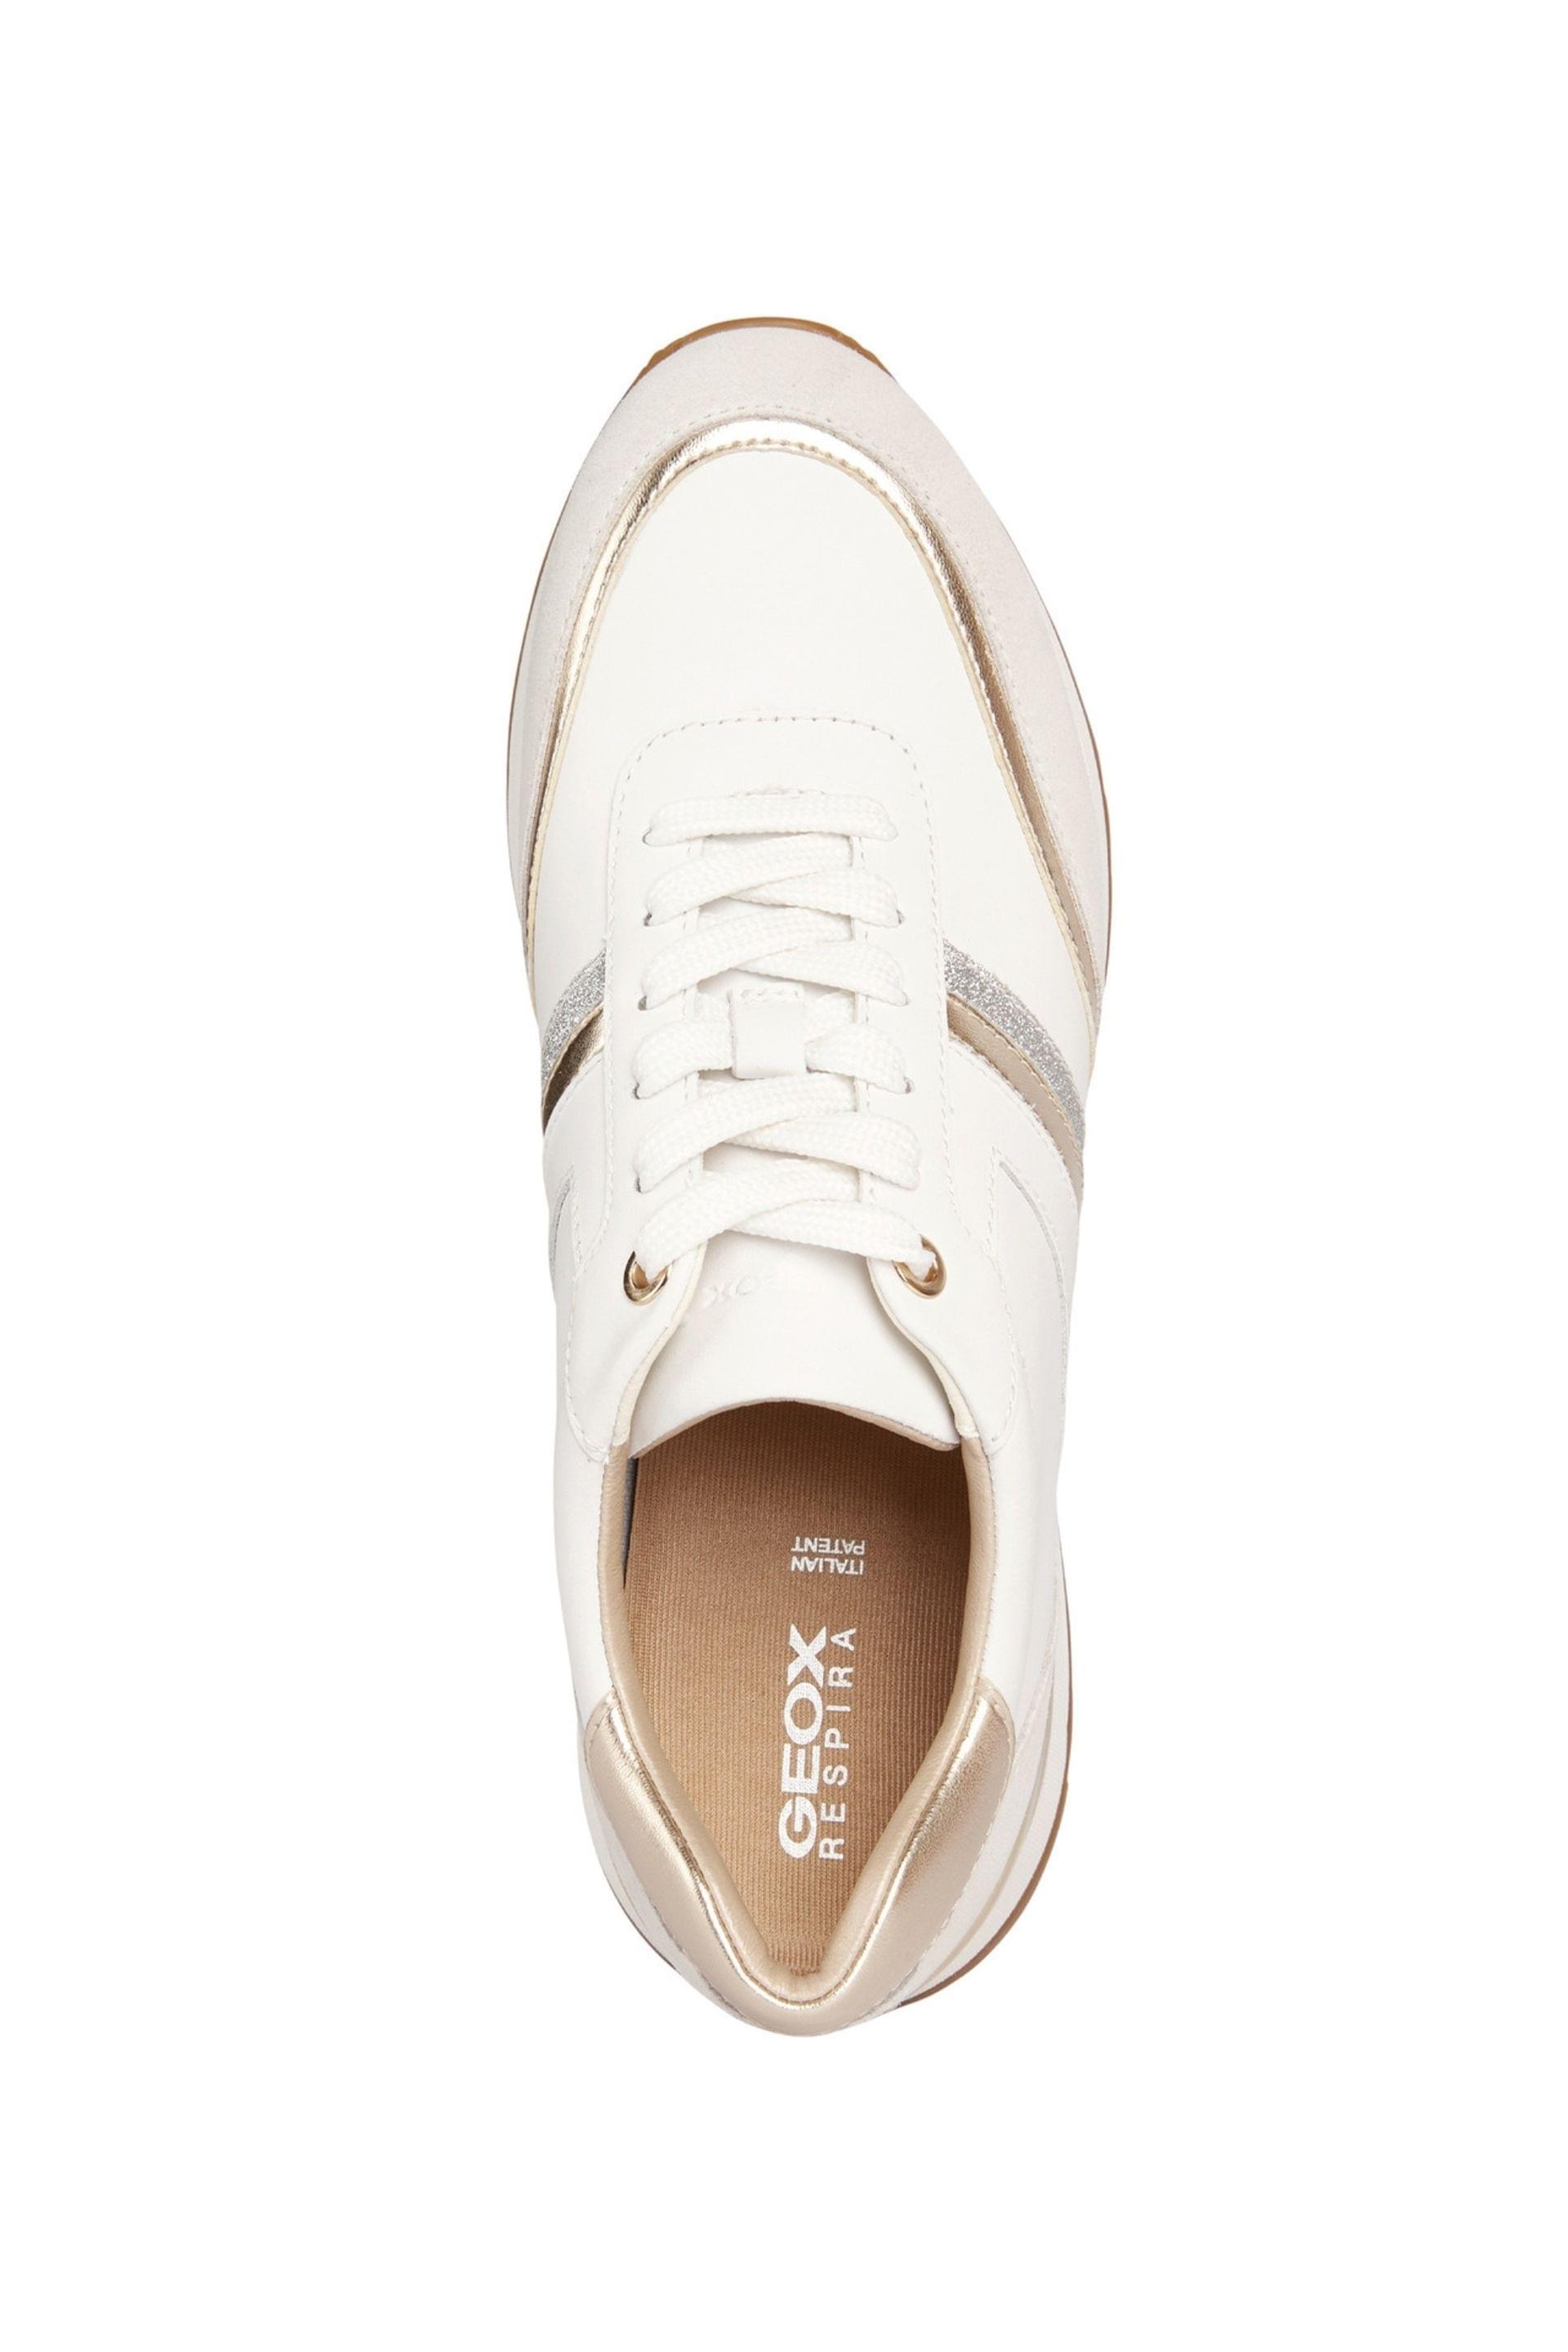 Geox Desya Sneakers D3500A_08522 in White/Off White